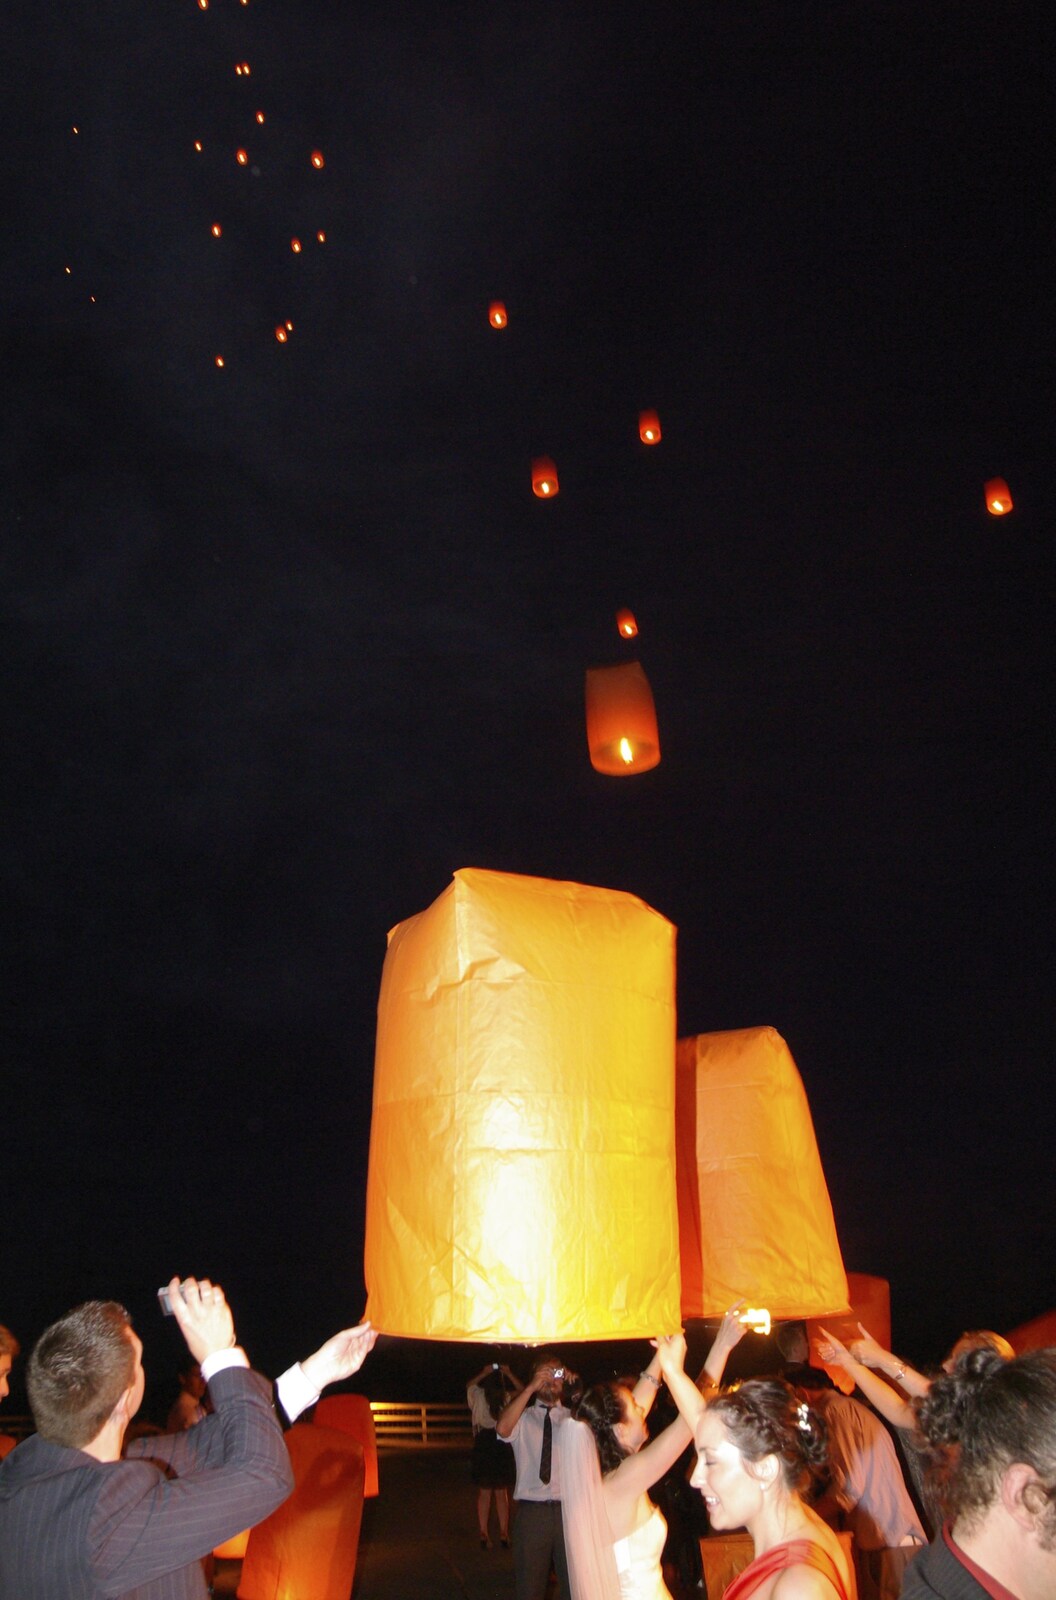 A load of lanterns float off from Julie and Cameron's Wedding, Ballintaggart House, Dingle - 24th July 2009